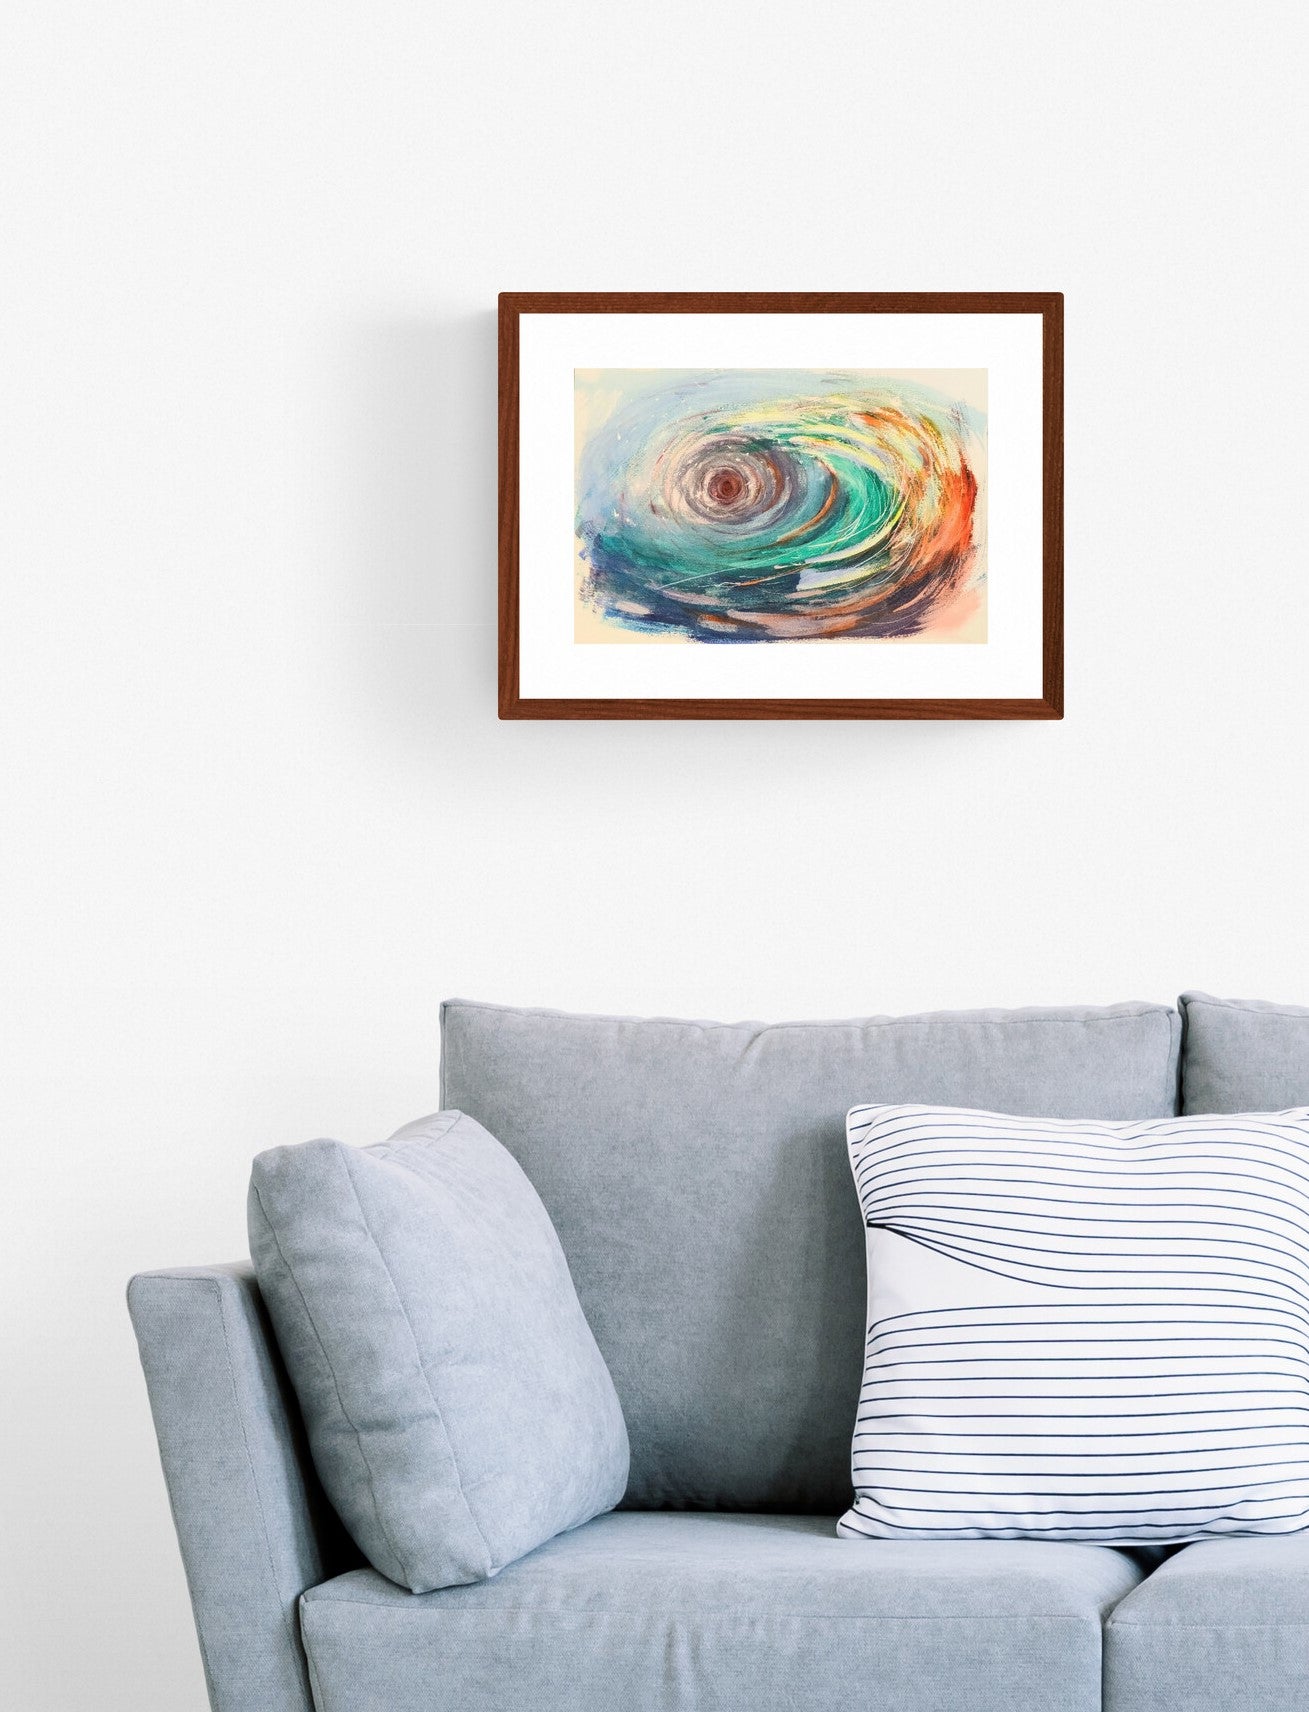 Vortex Stream of Conciousness watercolor painting